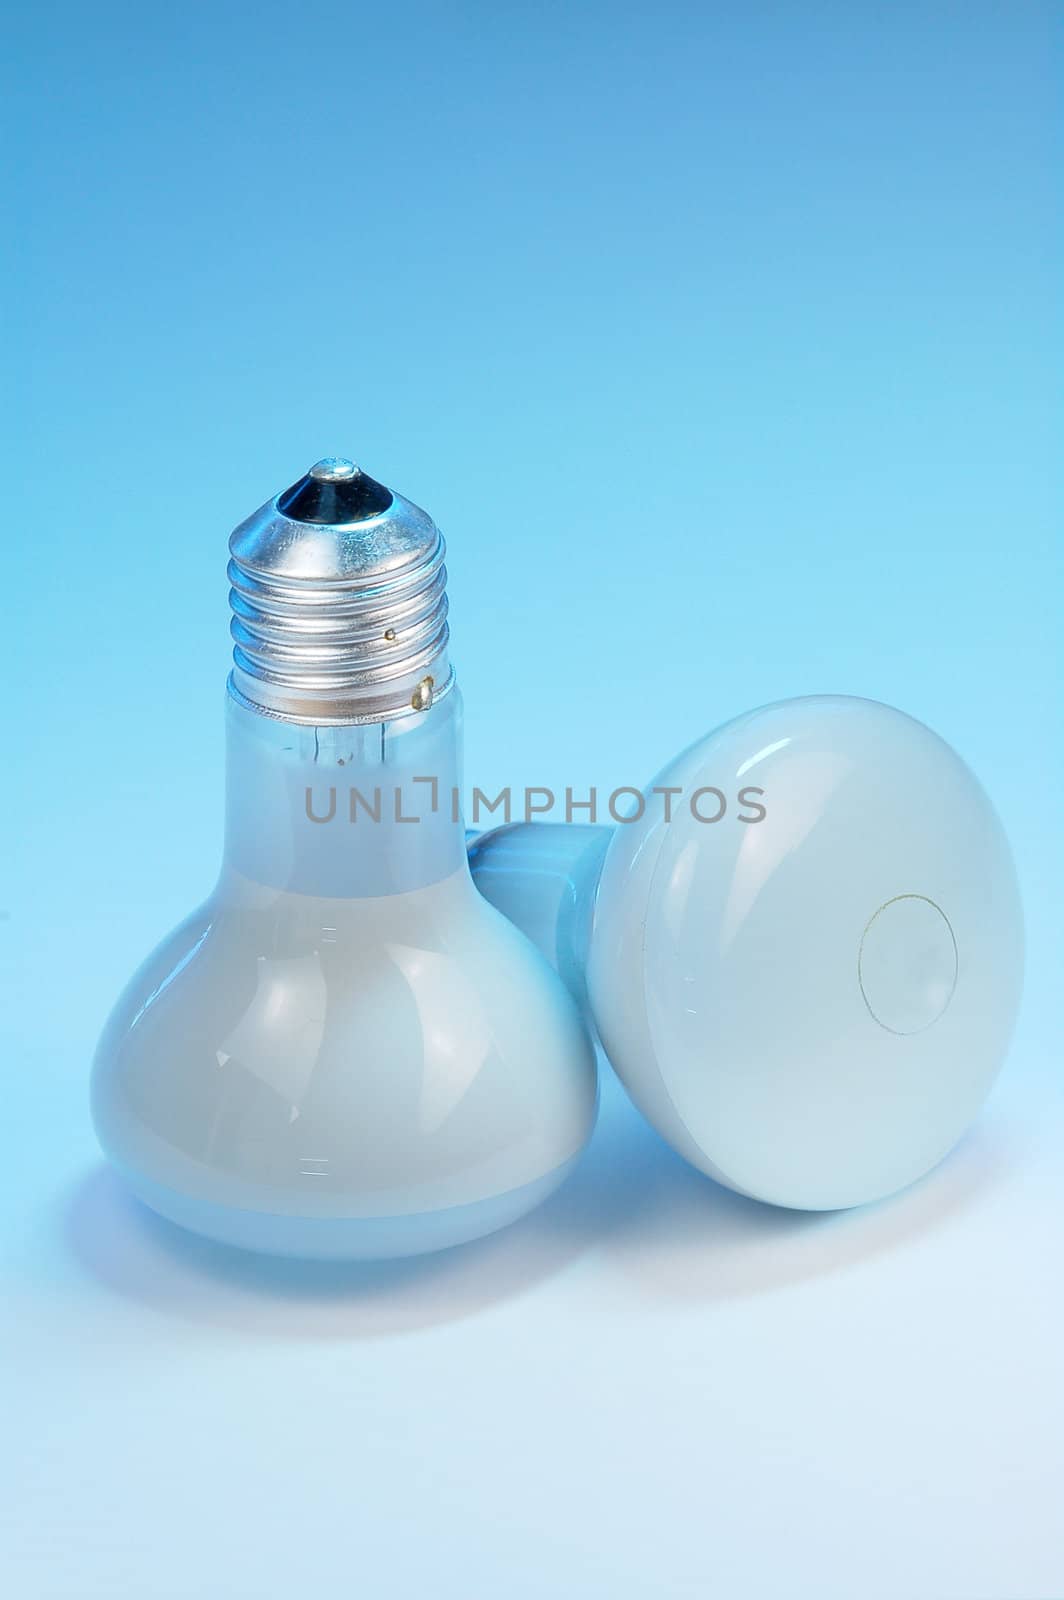 A light bulb isolated on blue background.